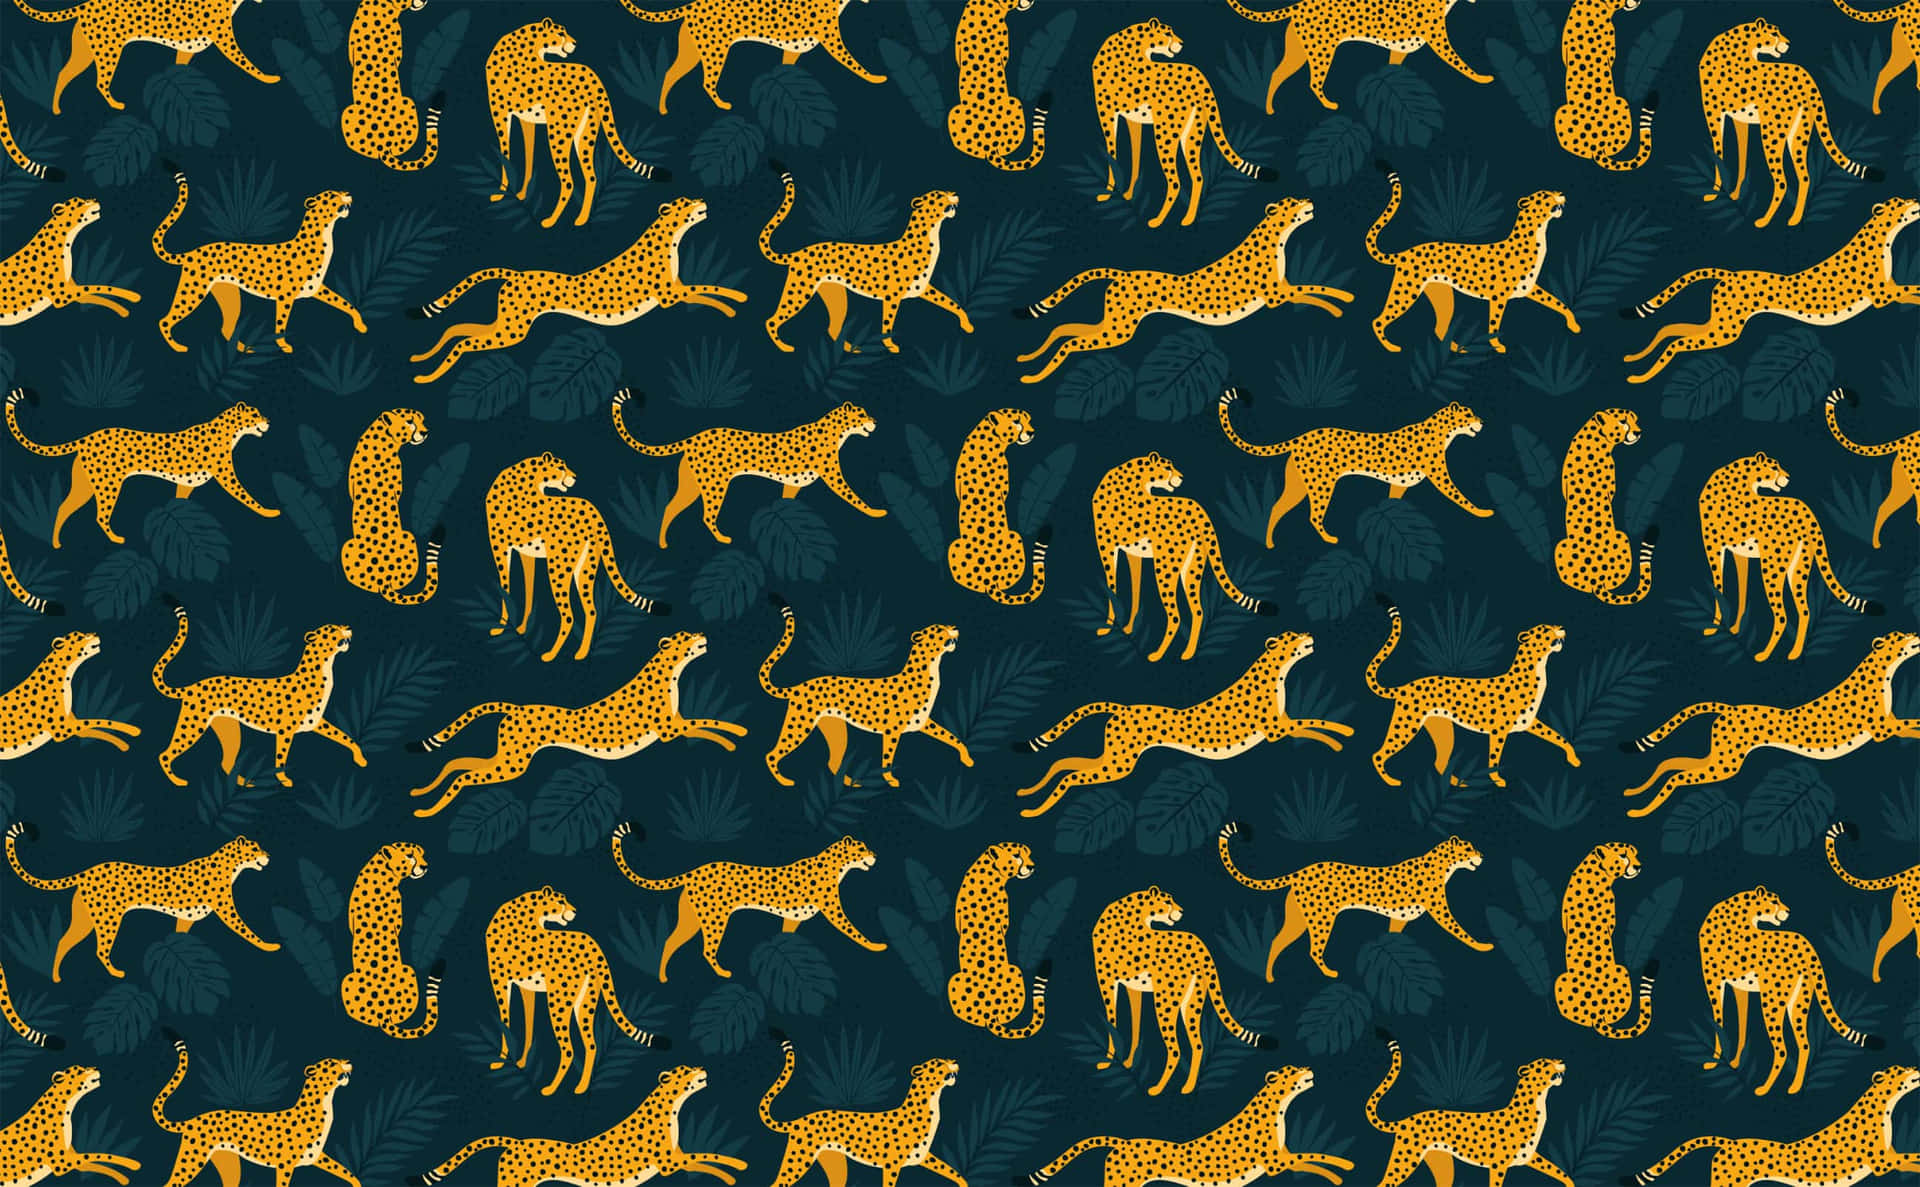 Complicated Wild Cats Wallpaper